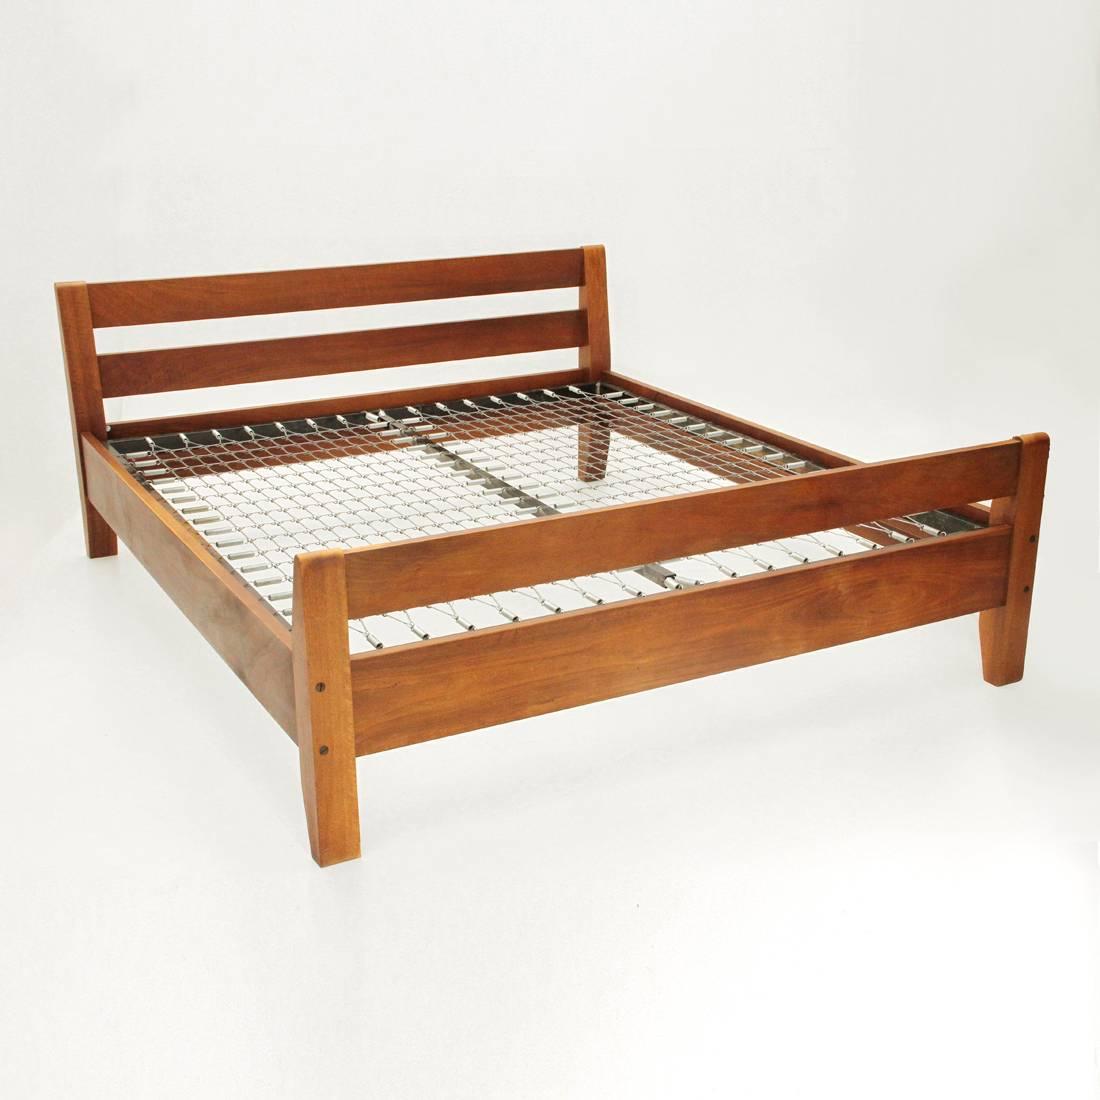 Bed produced by Bernini in the 60s.
Structure of excellent quality in veneered wood.
bed base with iron structure.
Good condition, some signs due to normal use over time.
Houses a mattress 170x190 cm

Dimensions: Width 183 cm - Depth 208 cm - Height